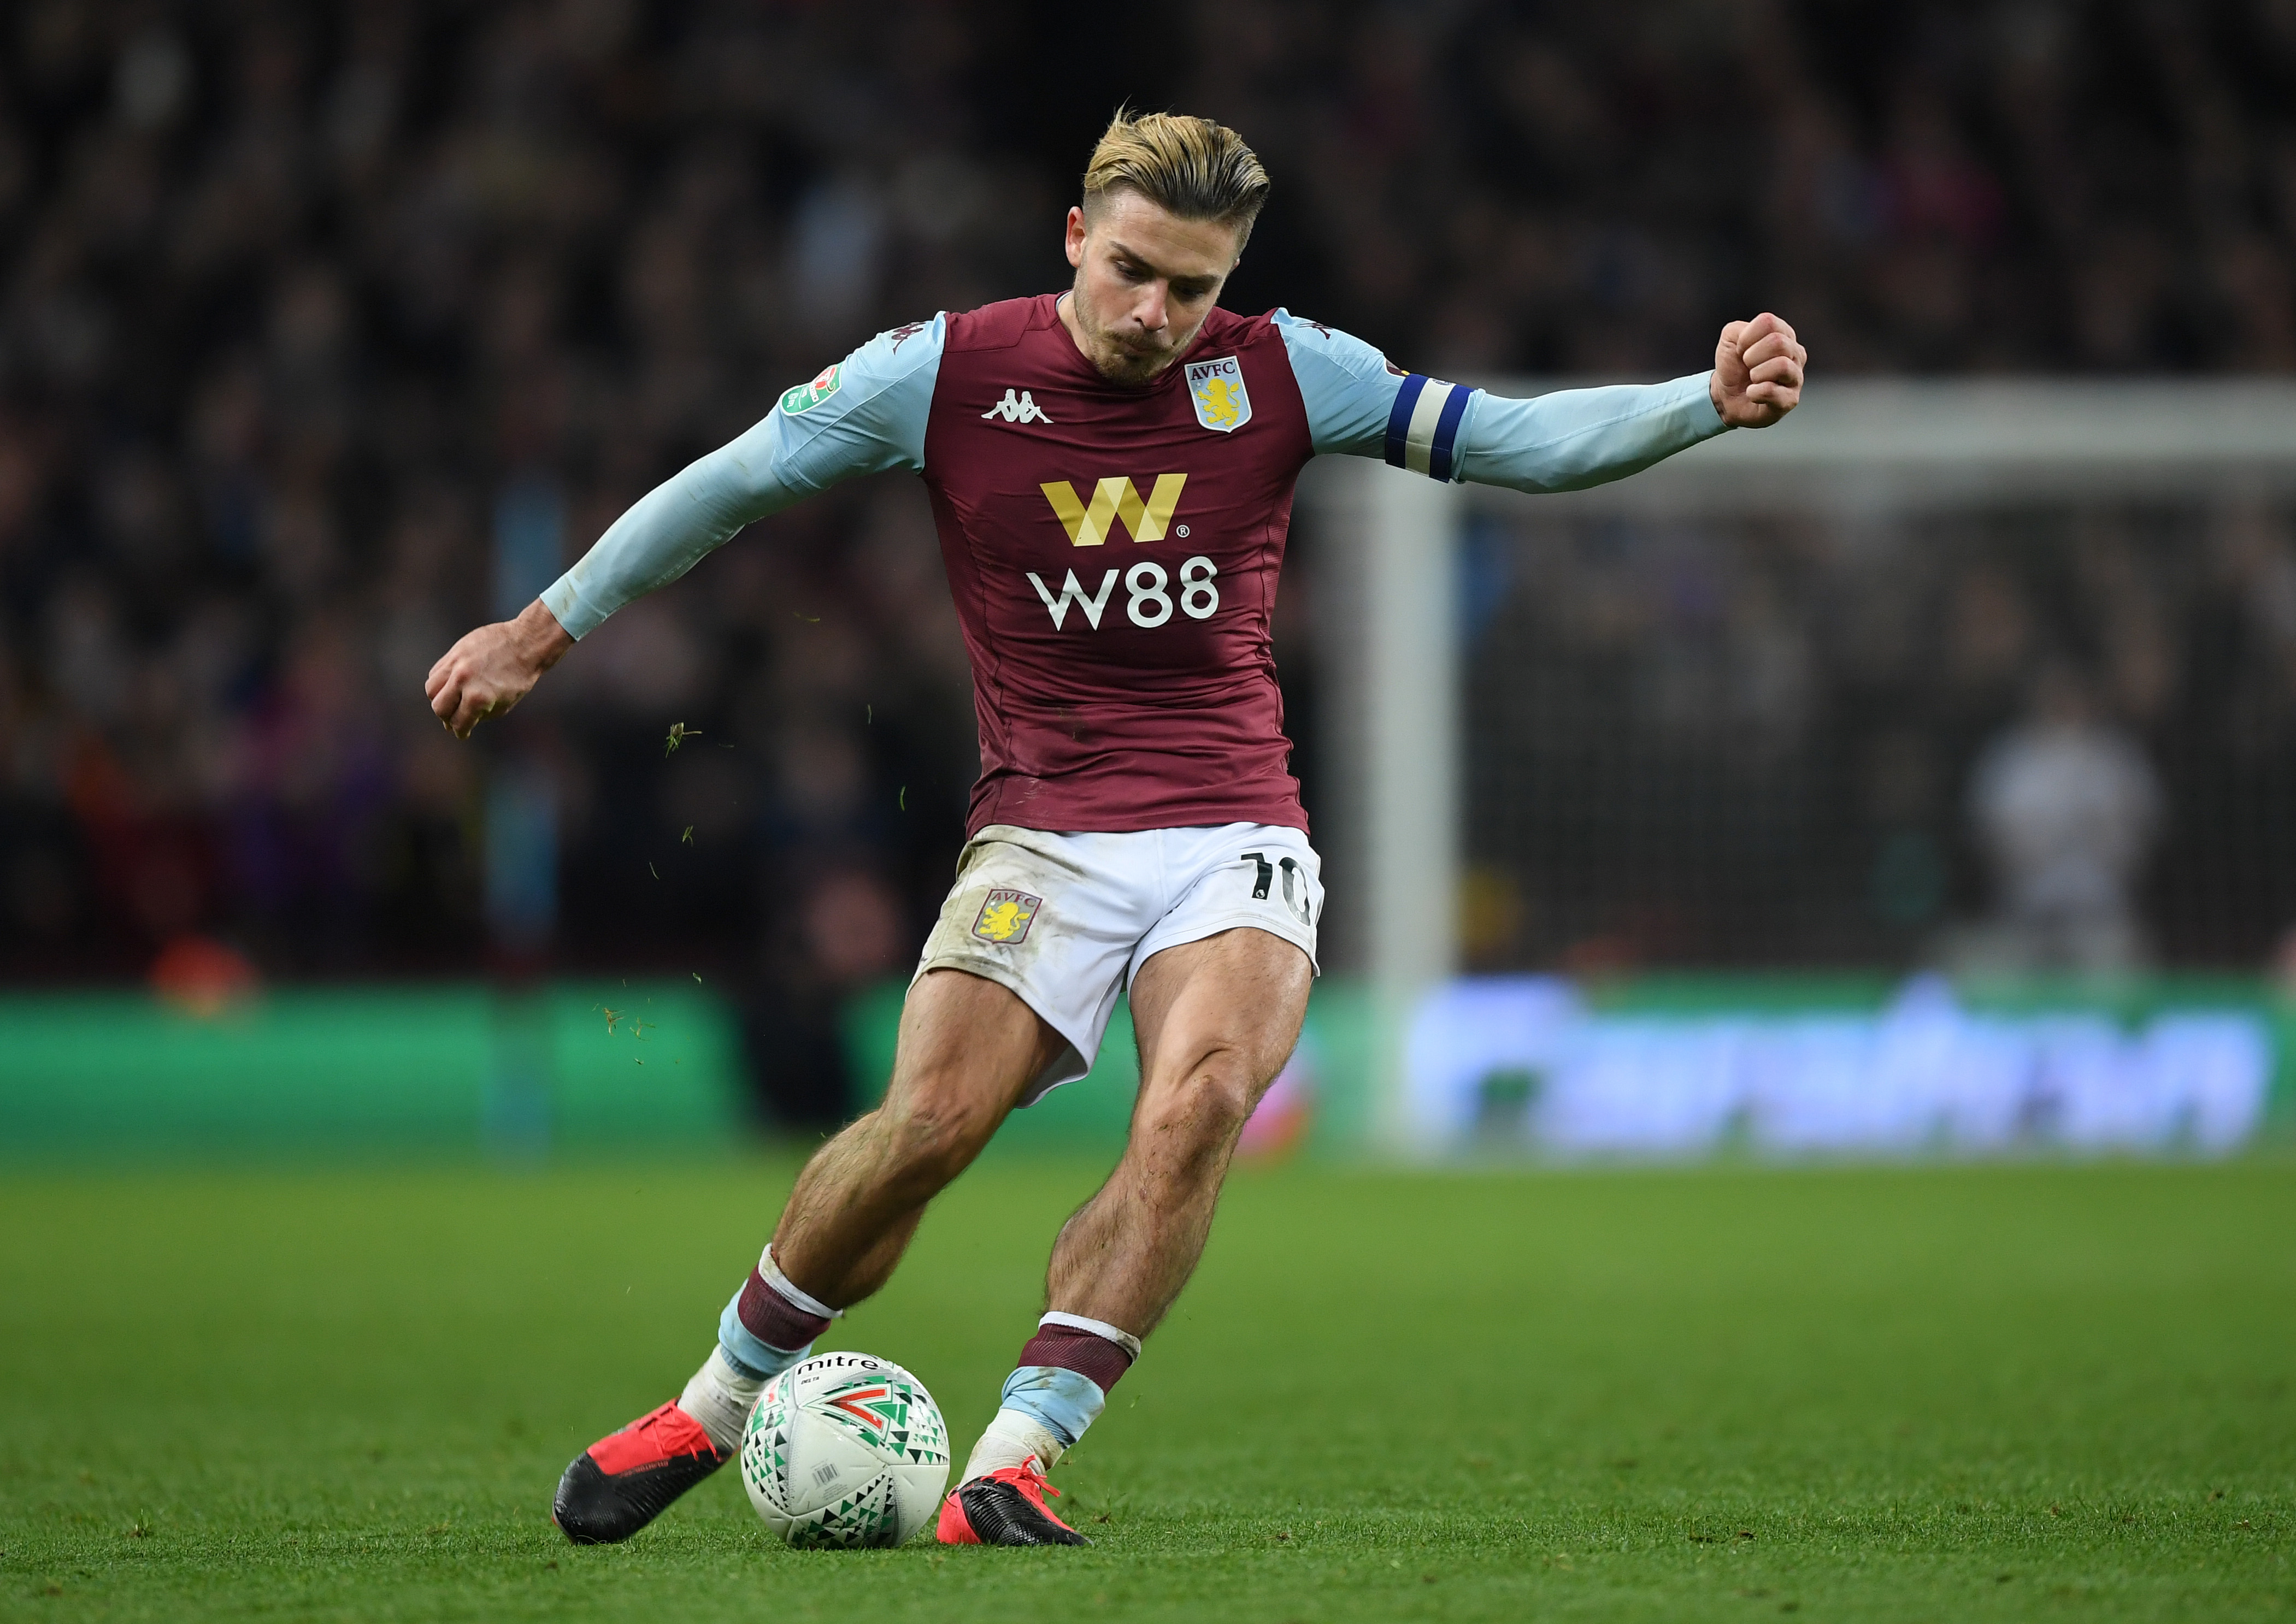 Jack Grealish will be key for Aston Villa against Liverpool (Photo by Shaun Botterill/Getty Images)